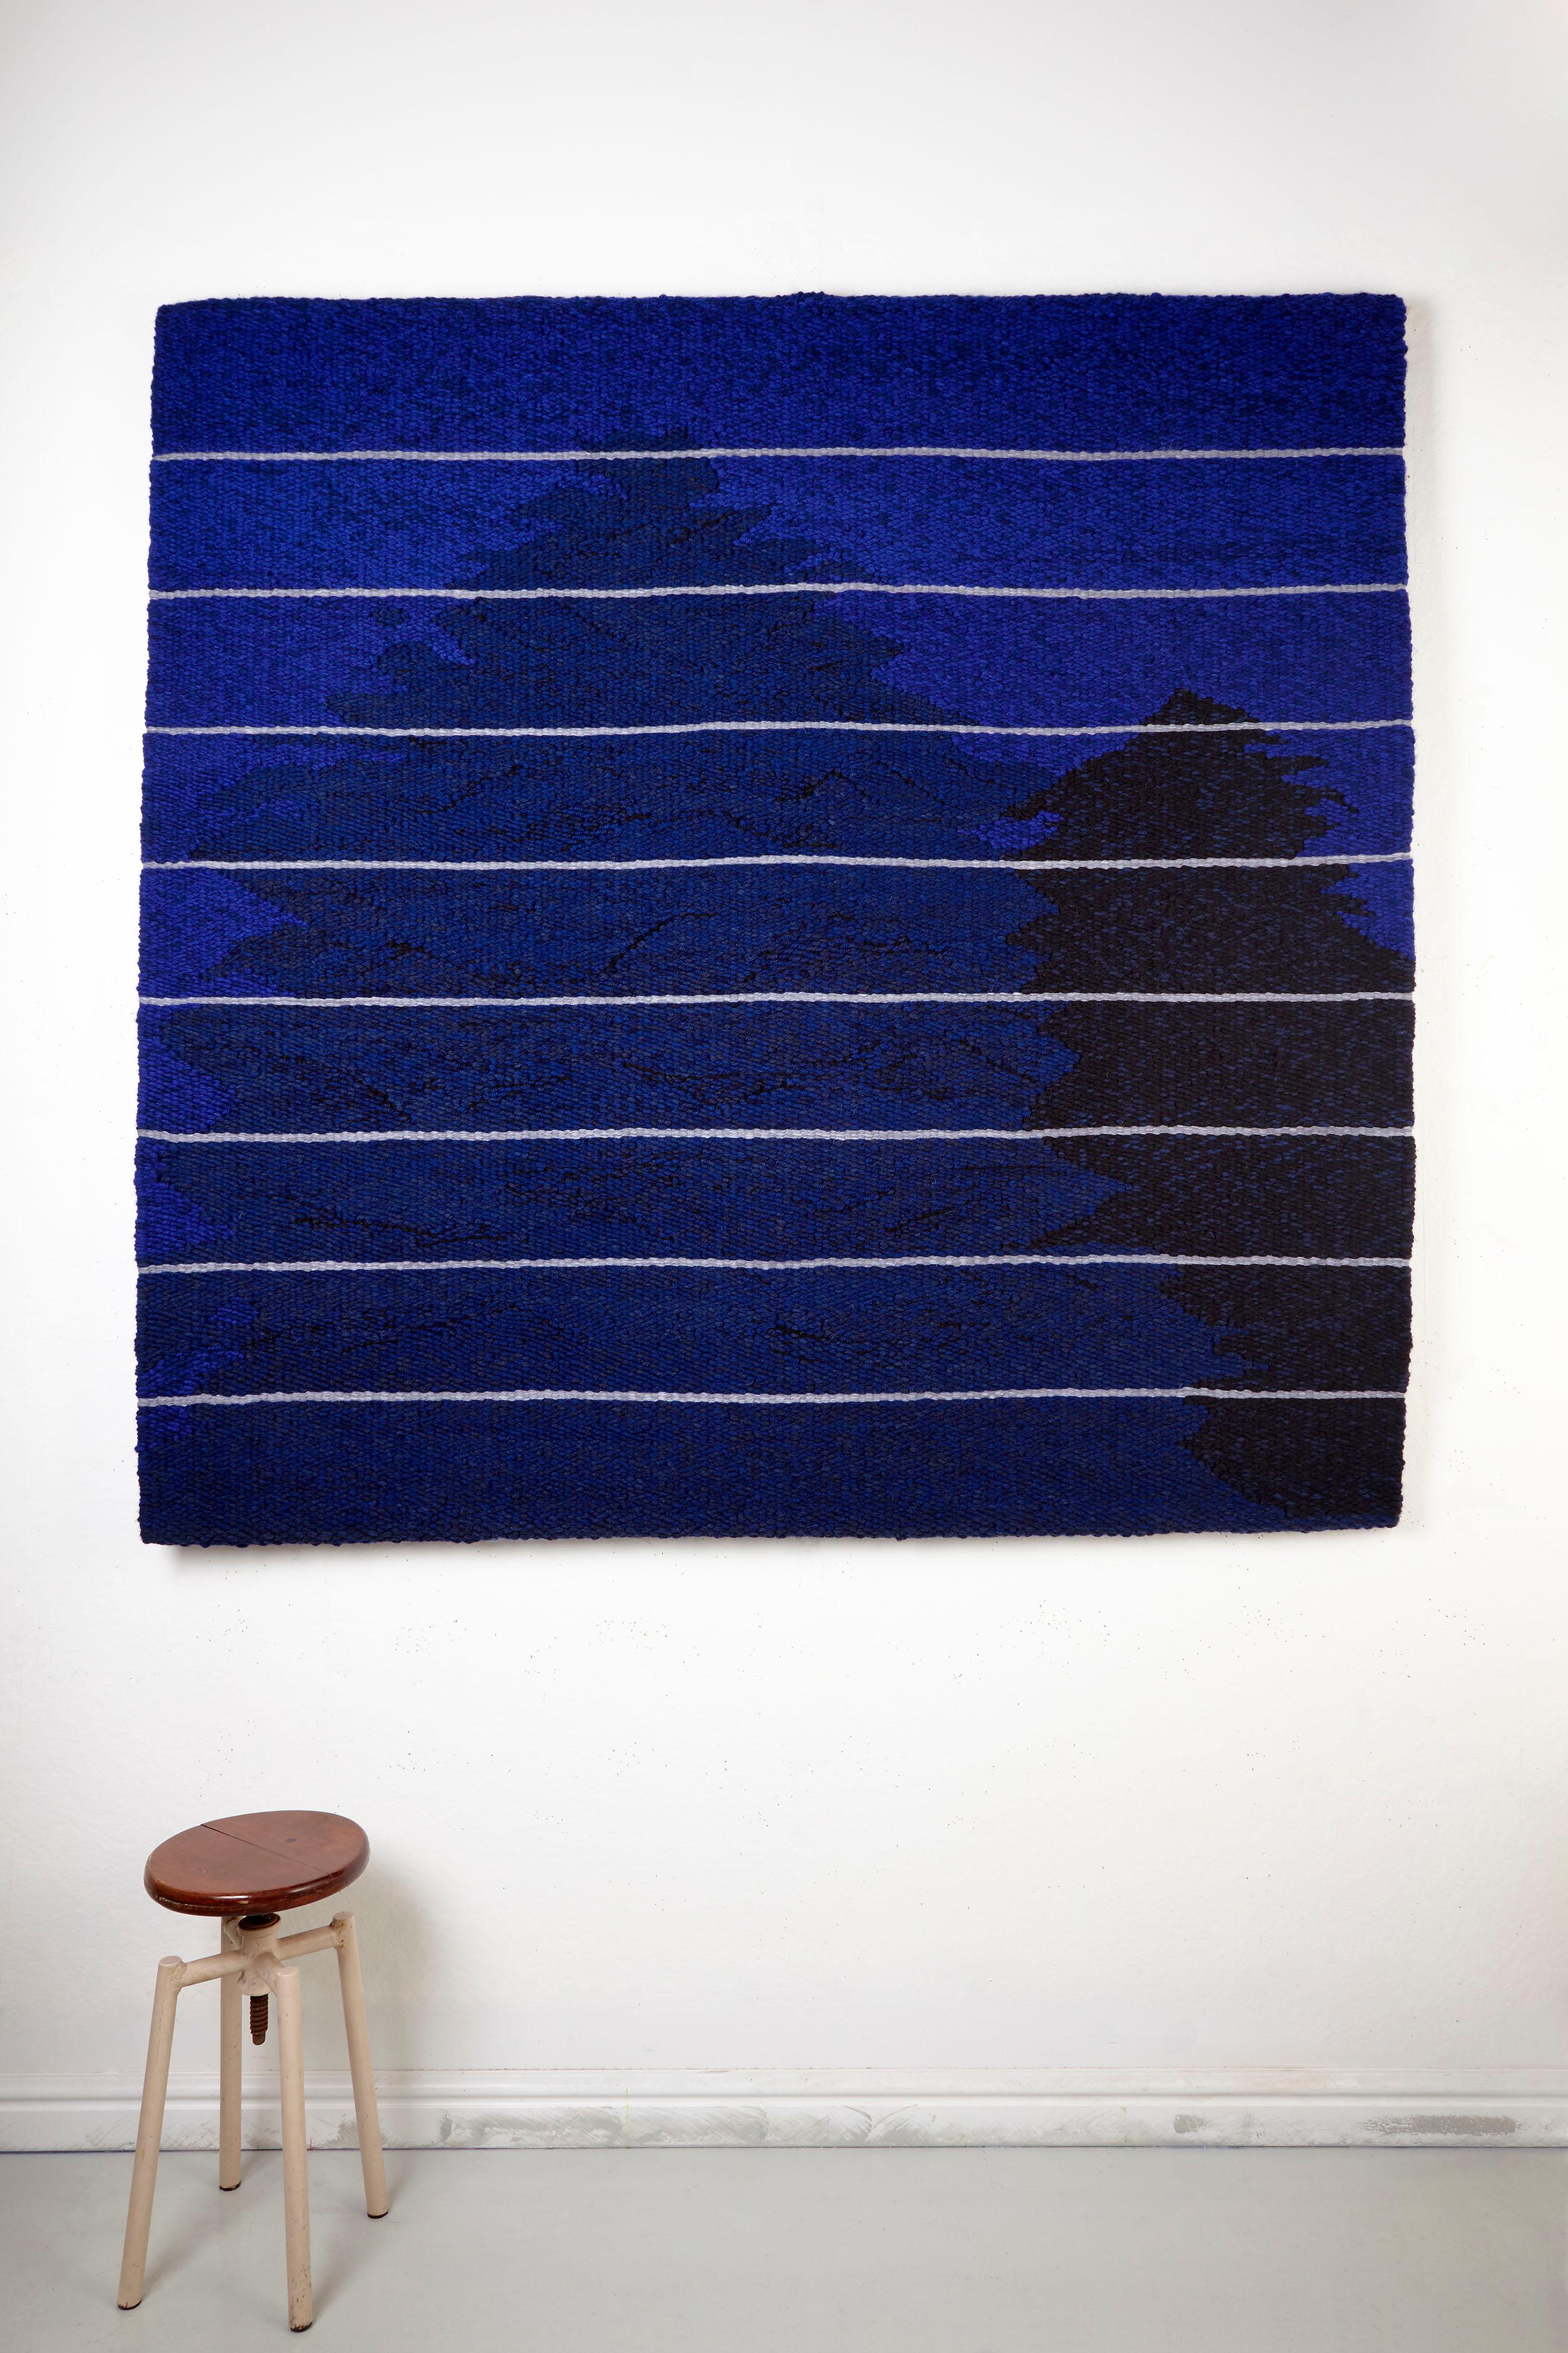 This tapestry titled “Moonlight, midnight and shadows” depicts a moonlit scene with 2 trees silhouetted against a rich blue sky, it is made up of various shades of blue, blue/purple and black, the moonlight is depicted by bands of silver grey across